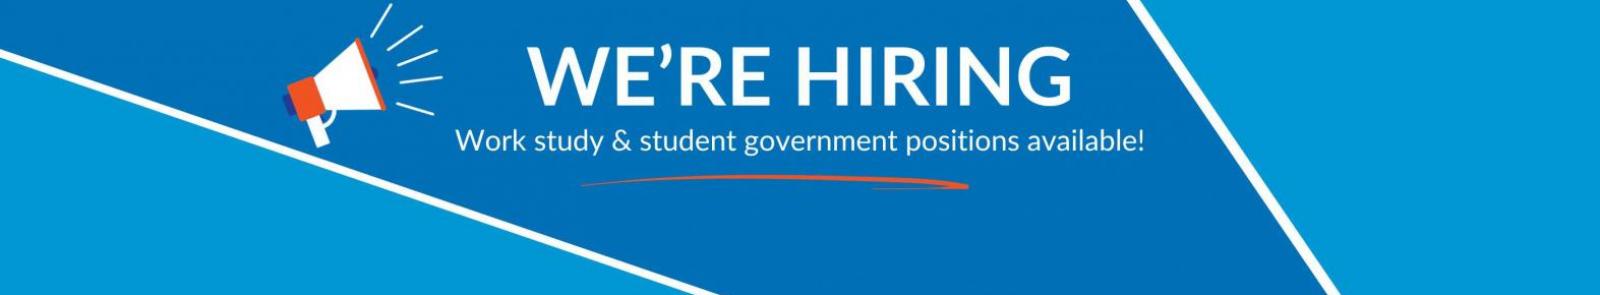 We are Hiring - Work study & student government positions available